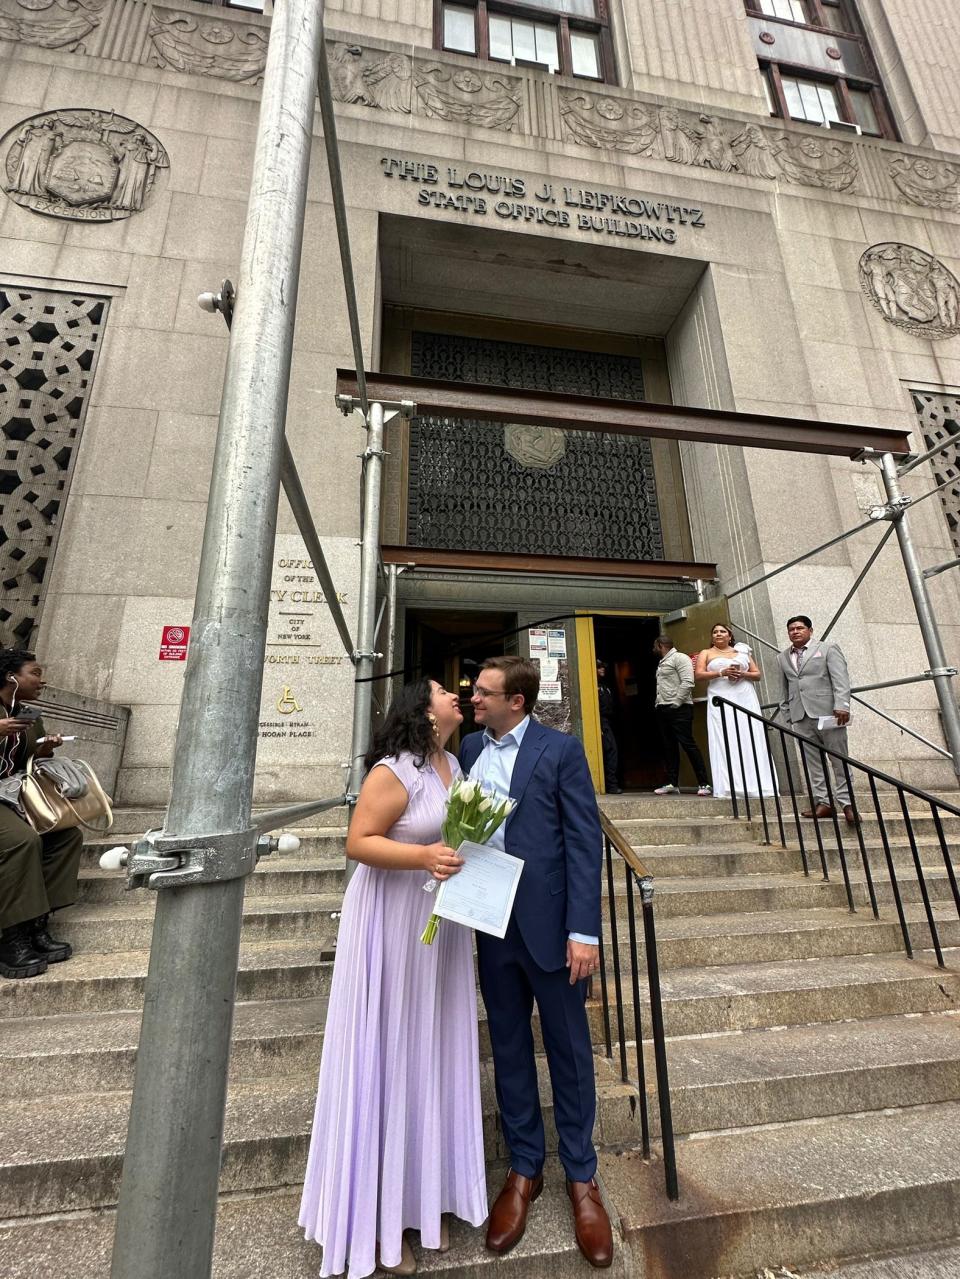 Chandler Dean and Carolina Treviño celebrate after their courthouse wedding.